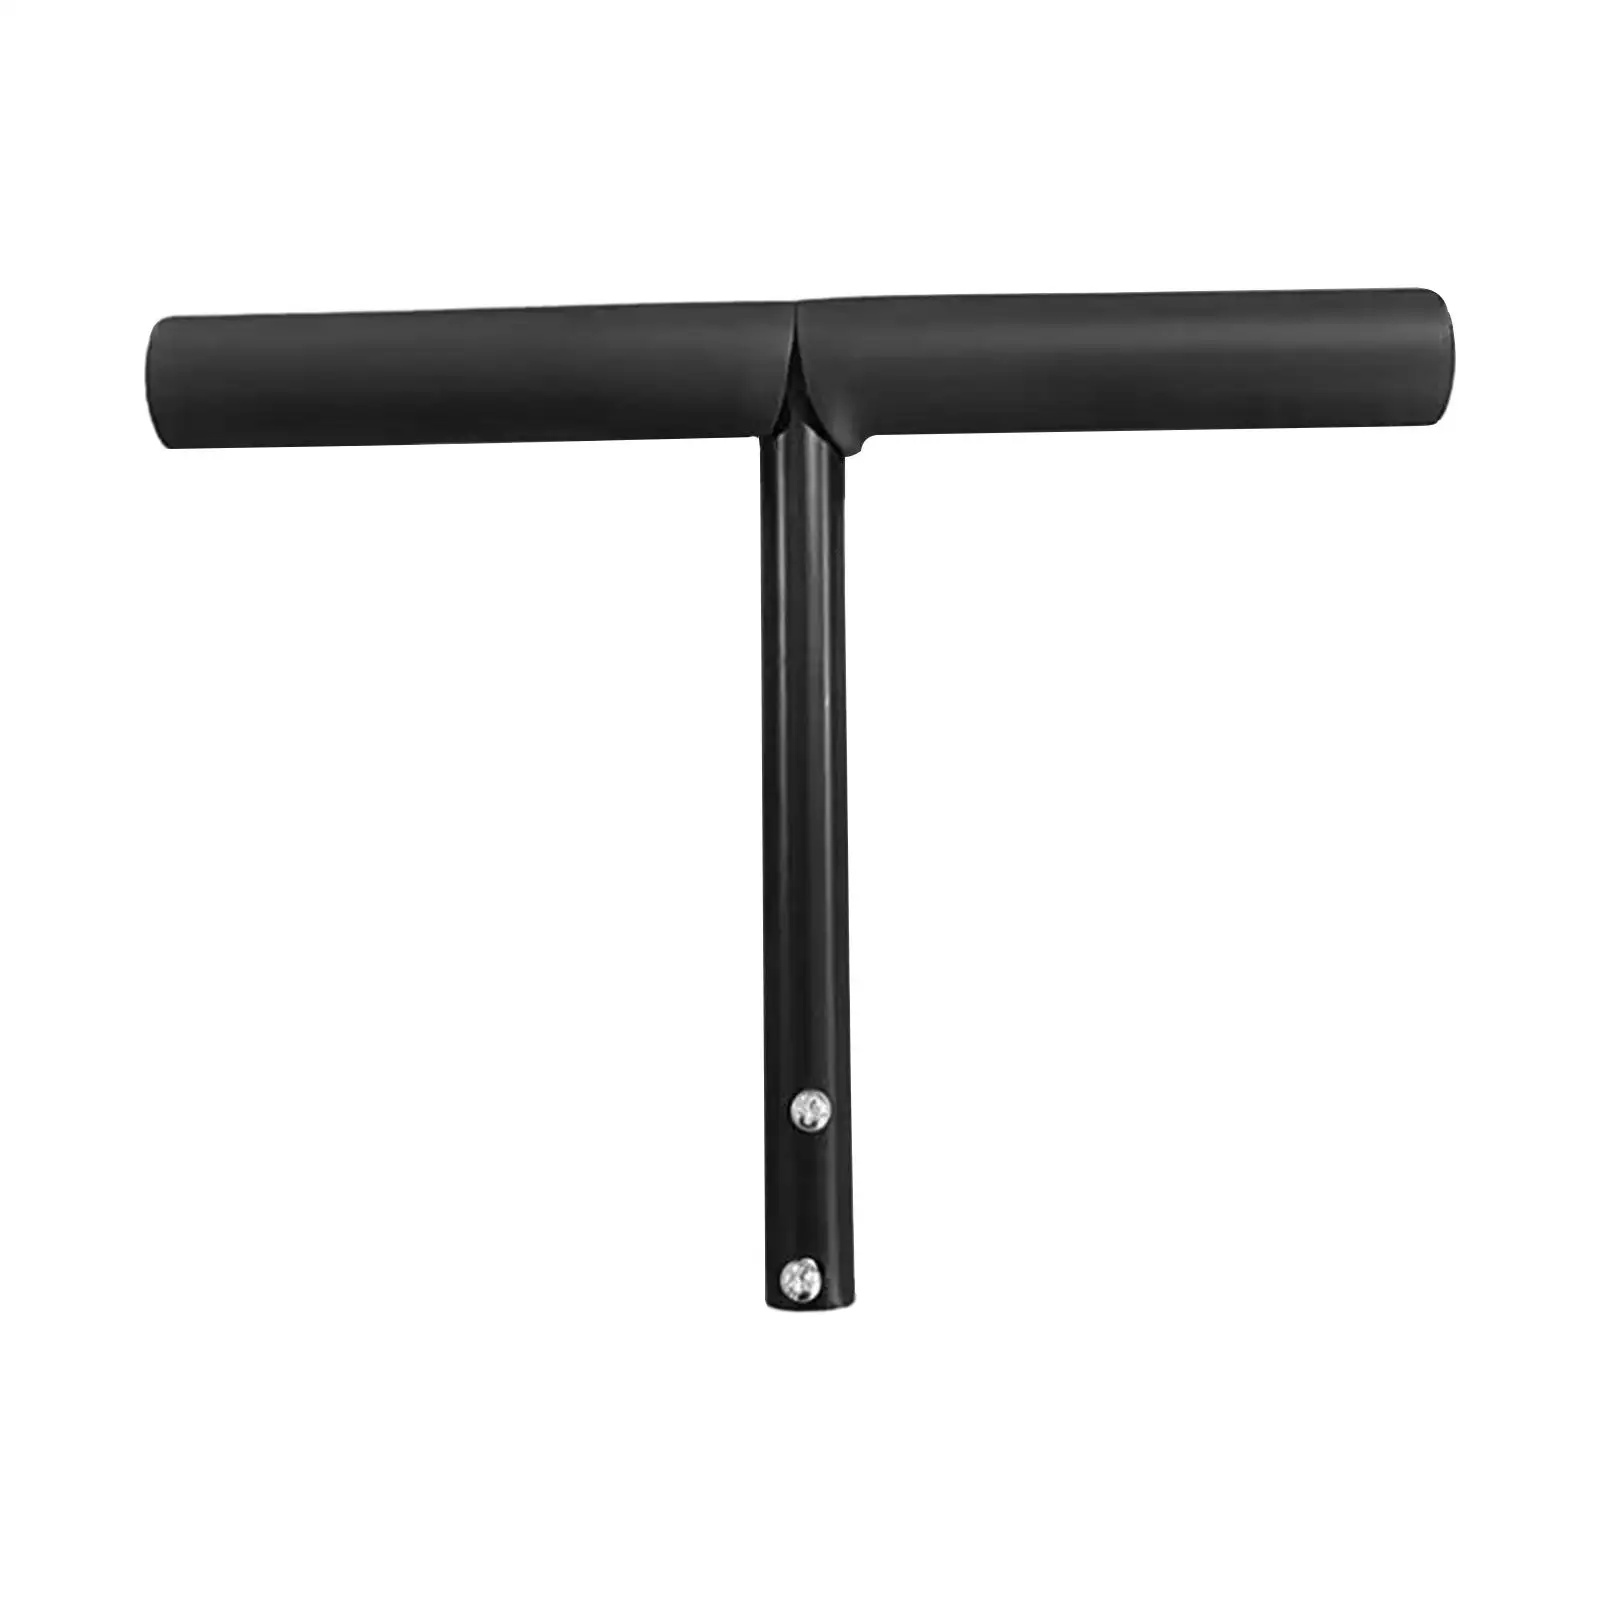 T Shaped Push Handle Bar Baby Bike Accessory Practical Easy to Install for Outdoor, Travel